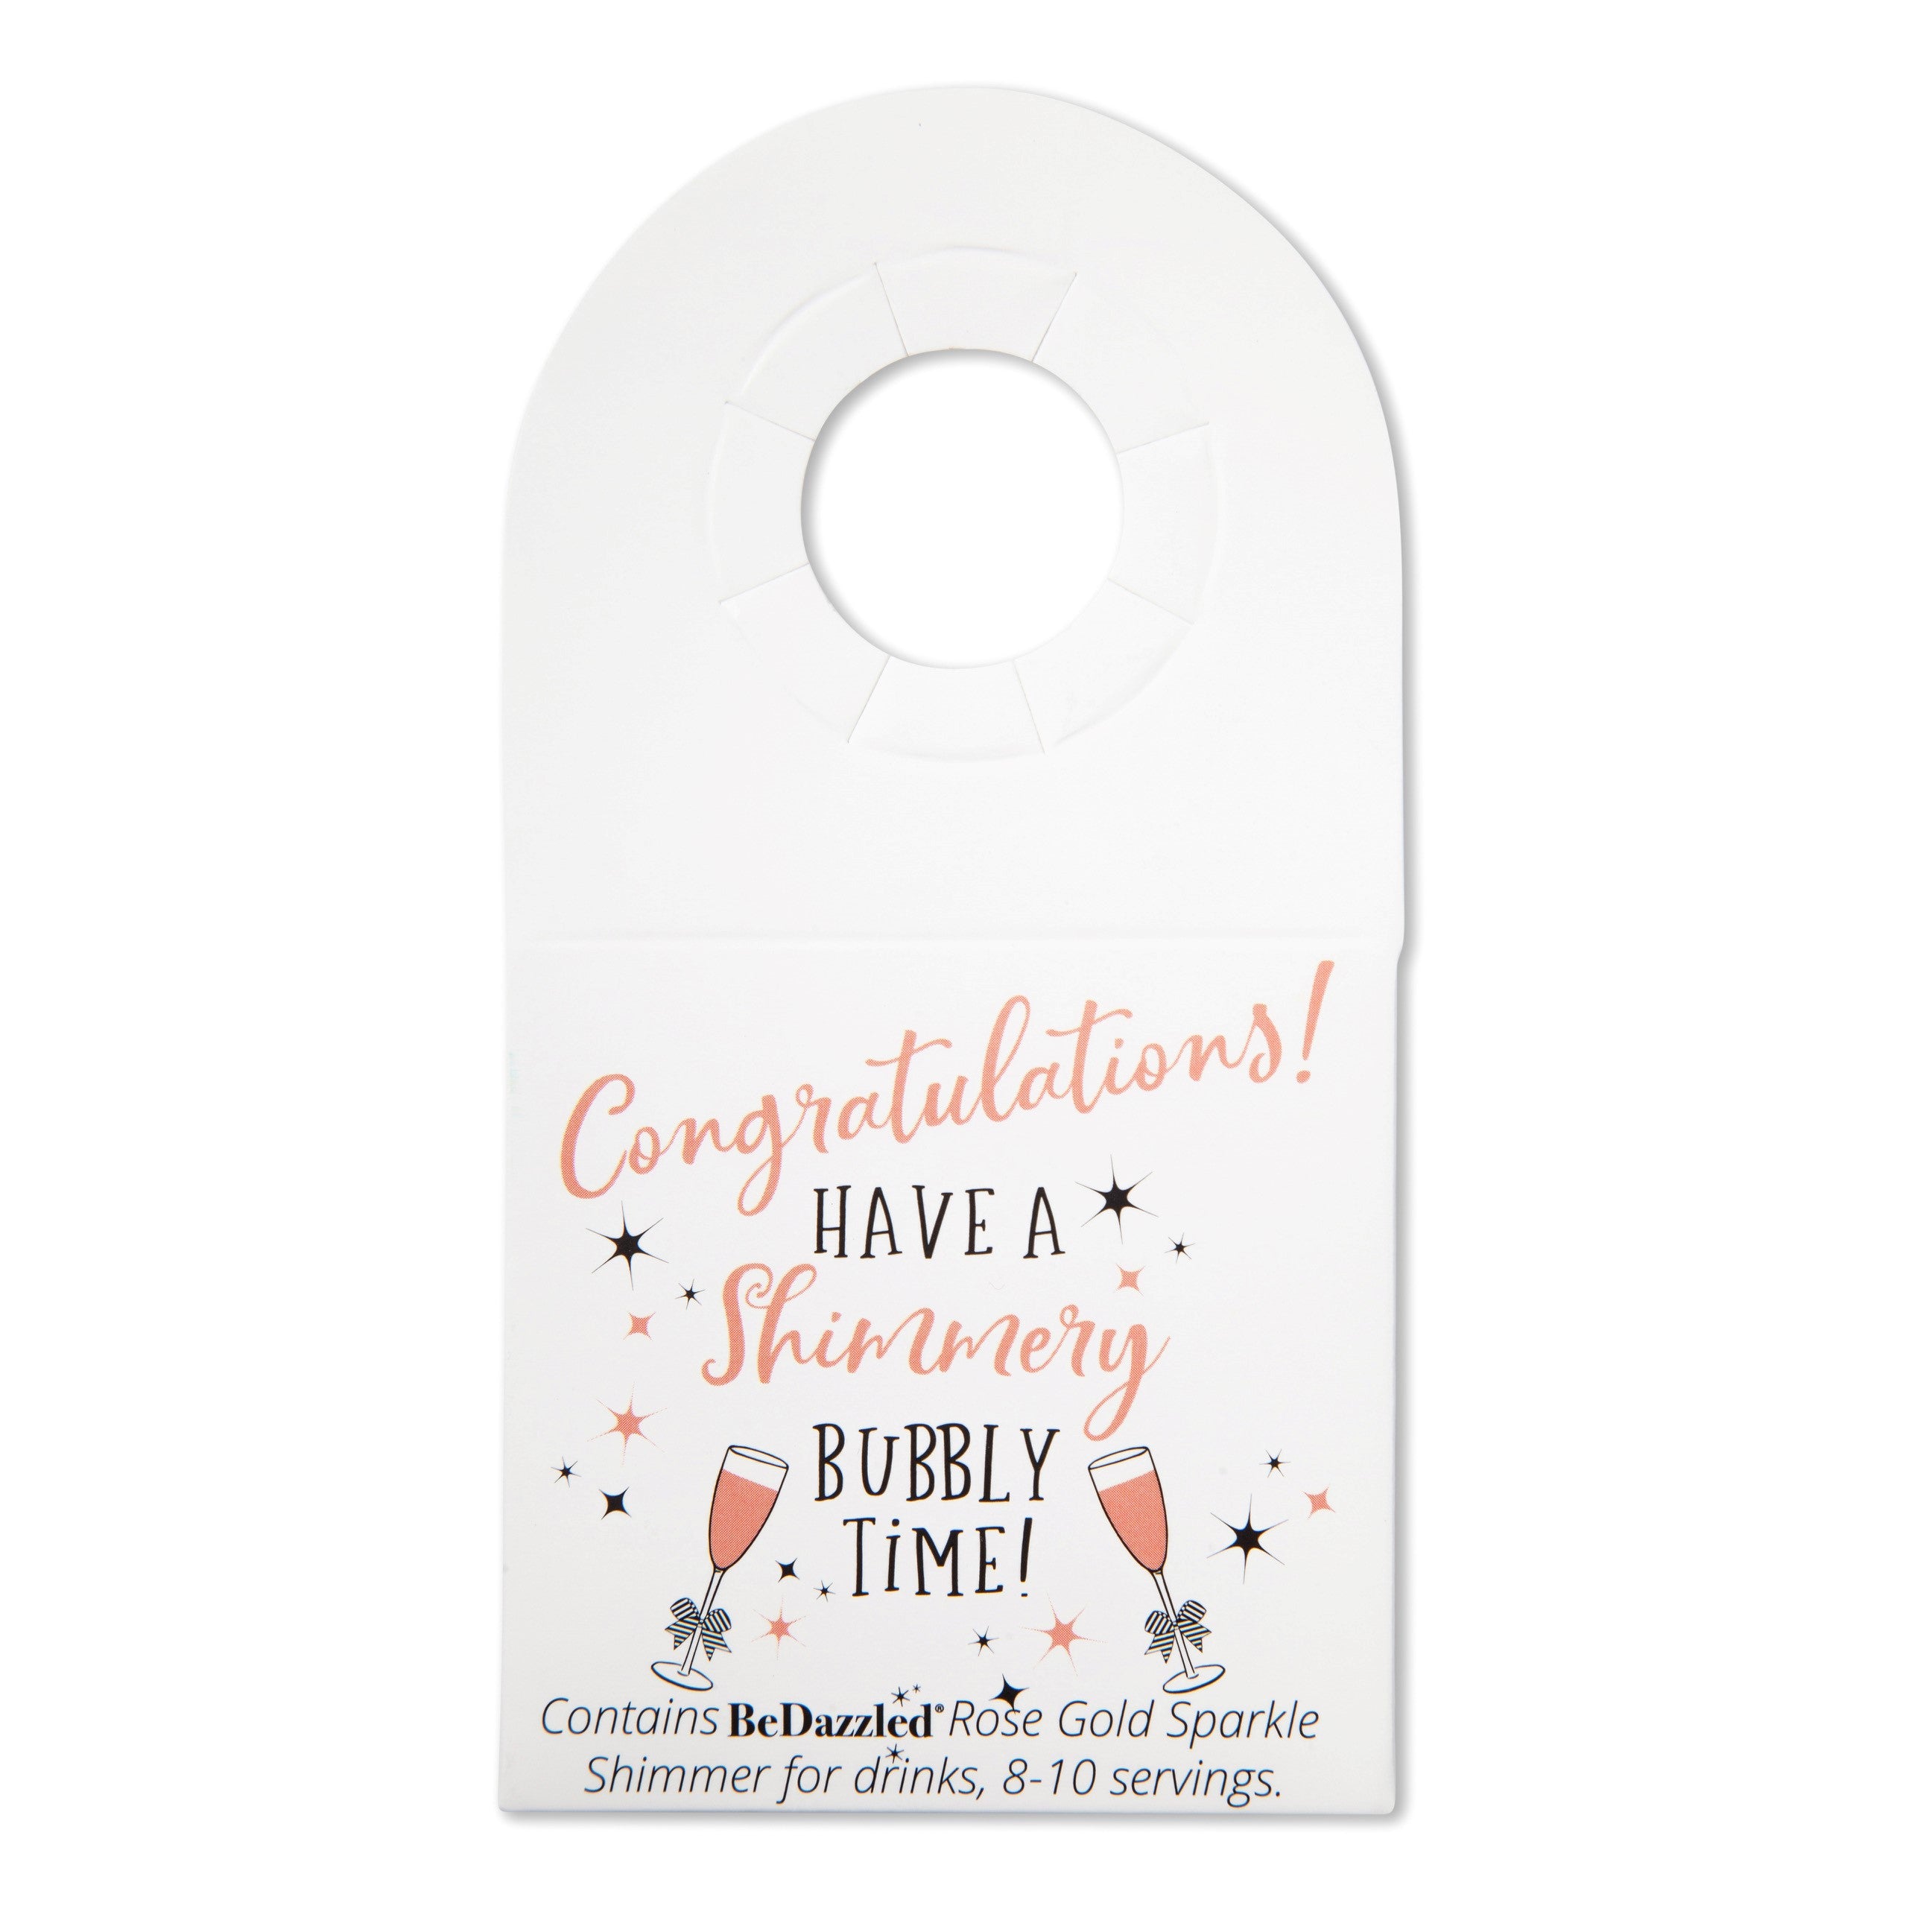 Congratulations! Have a shimmery bubbly time! - bottle neck gift tag containing ROSE GOLD shimmer